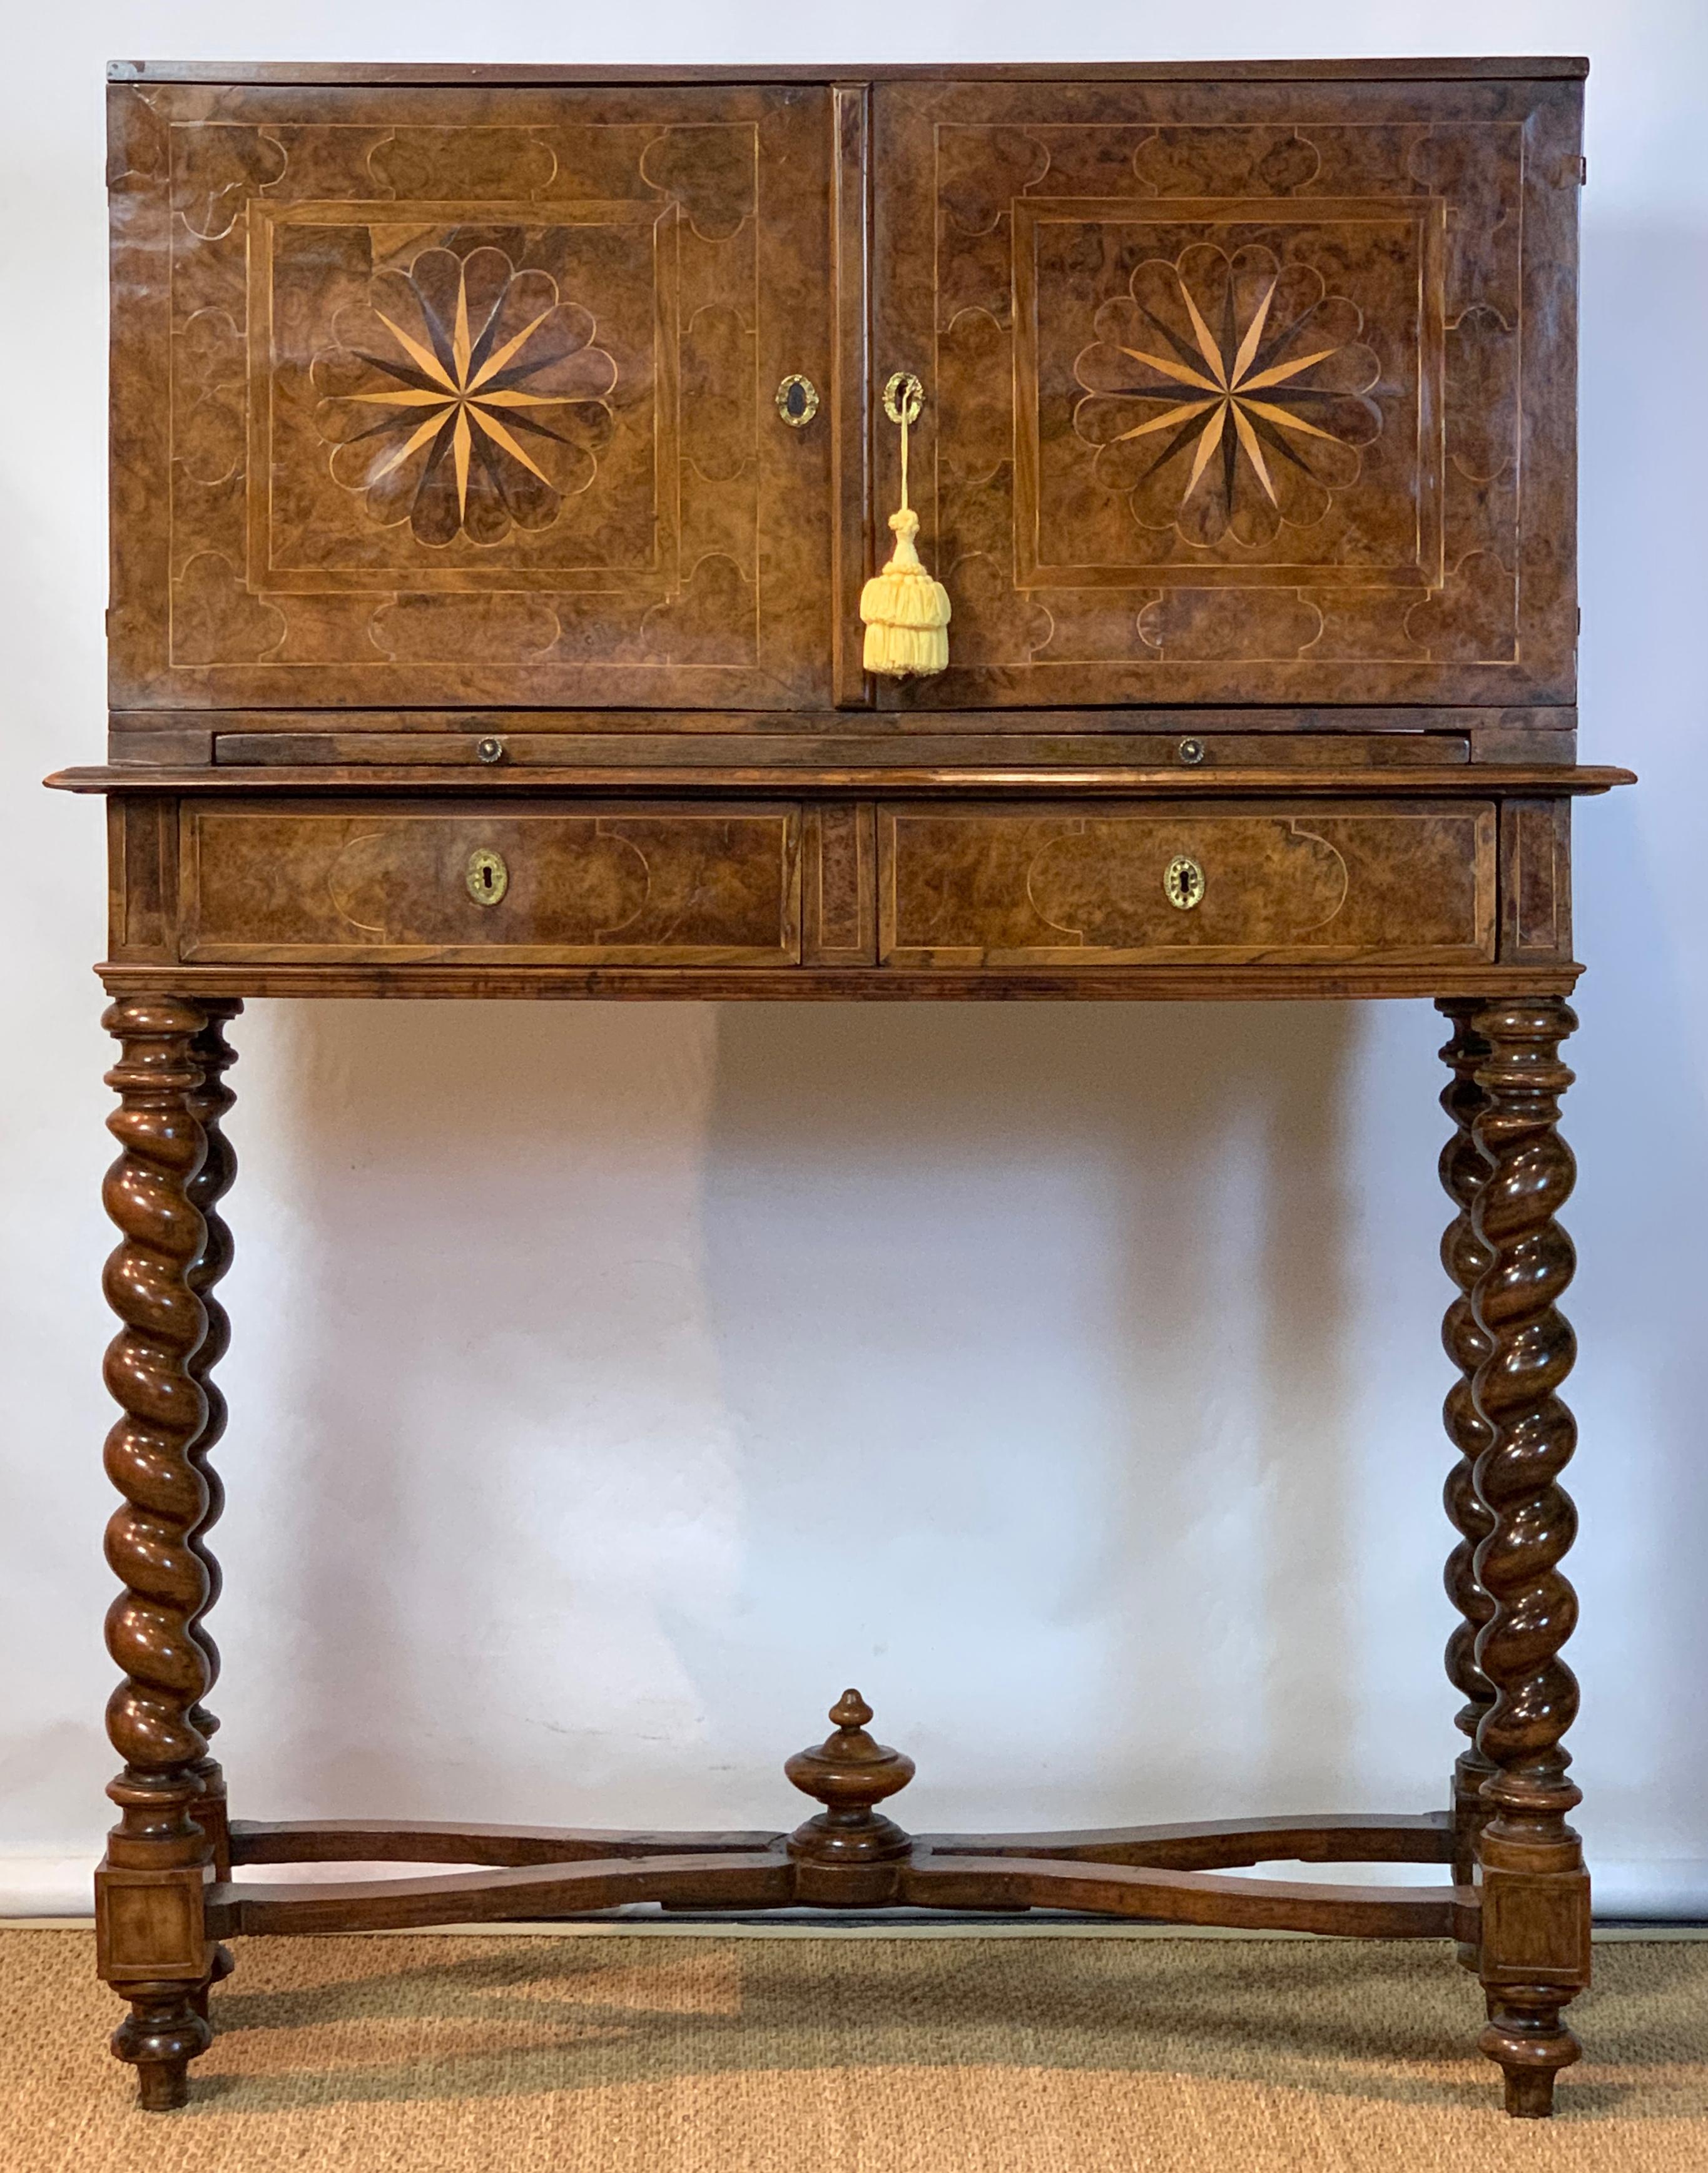 A handsome early 18th century Italian burl walnut chest on stand with elaborate inlay throughout resting on barley twist supports linked by carved stretchers. The interior of the cabinet is later fitted for use as a spirit cabinet with compartments